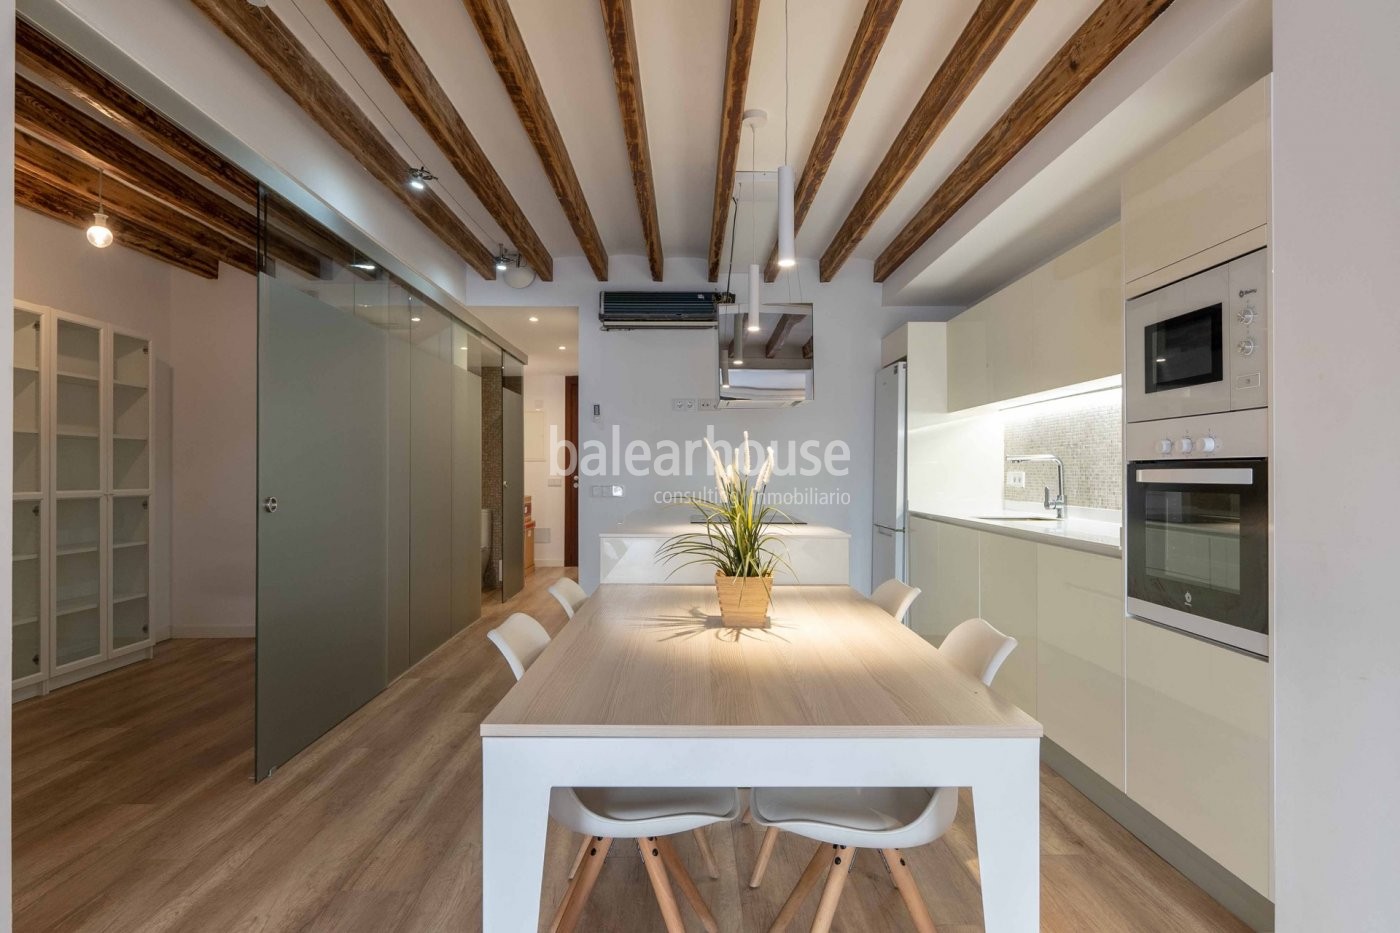 Beautiful ground floor apartment with large terrace in Palma's sought-after Santa Catalina district